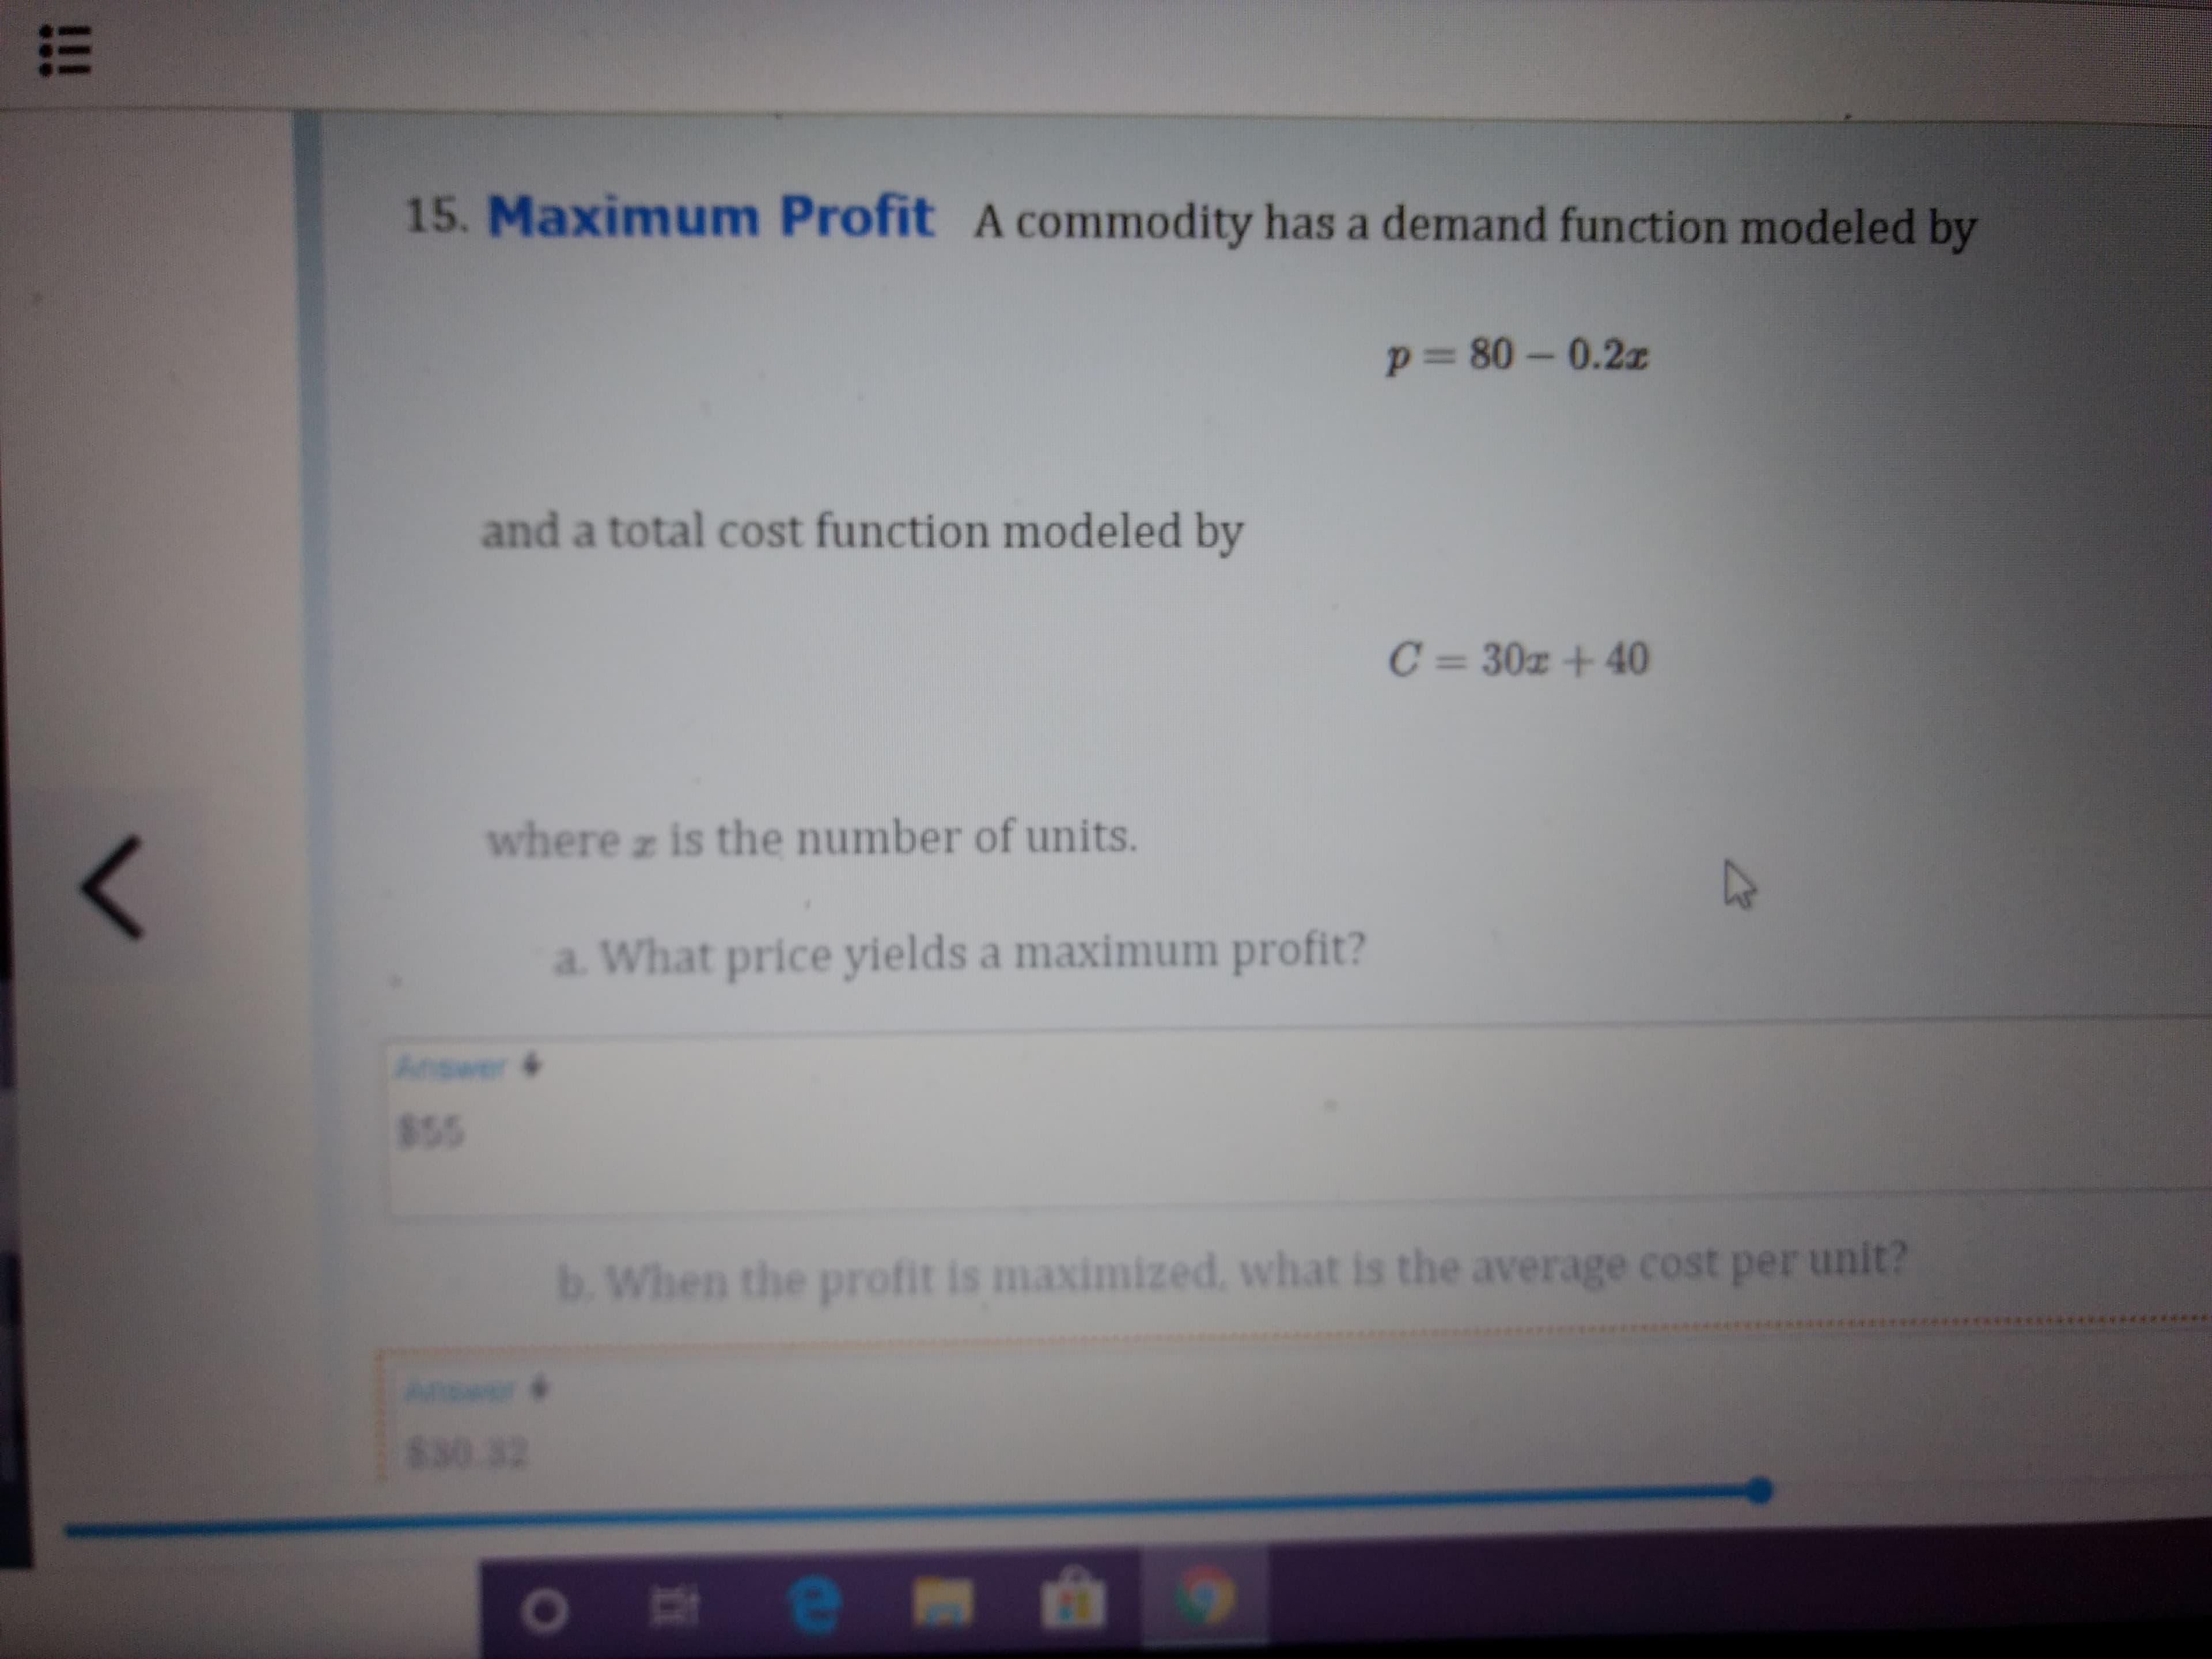 15. Maximum Profit A commodity has a demand function modeled by
P3D80-0.2z
and a total cost function modeled by
C= 30z +40
where z is the number of units.
a. What price yields a maximum profit?
Answer 4
855
b. When the profit is maximized, what is the average cost per unit?
********
Answer
830.32
!!!
